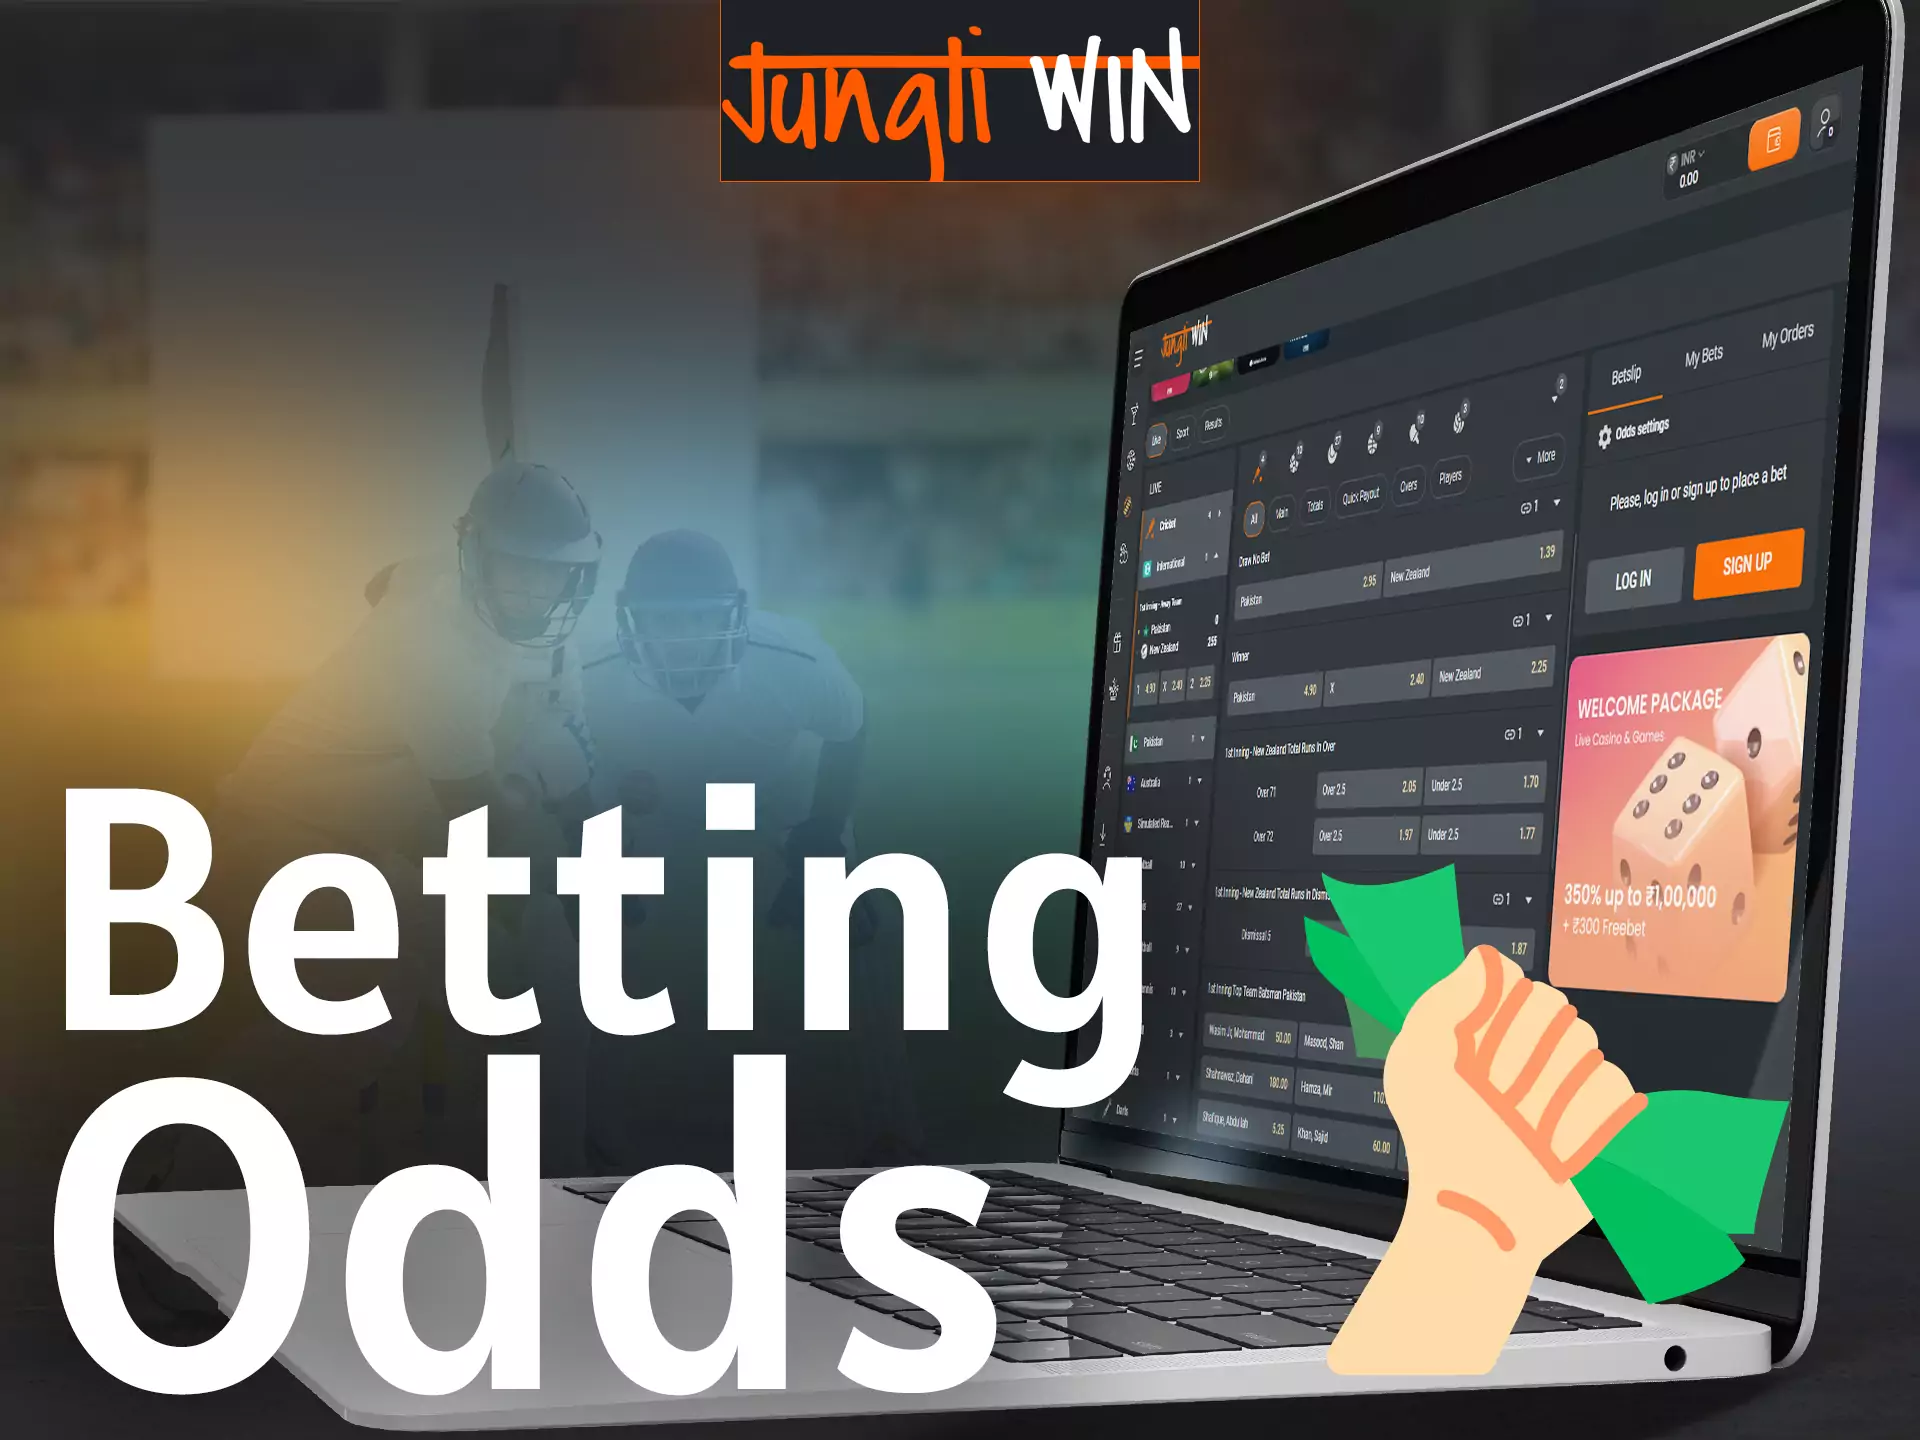 Jungliwin offers players special odds for betting on sports events.